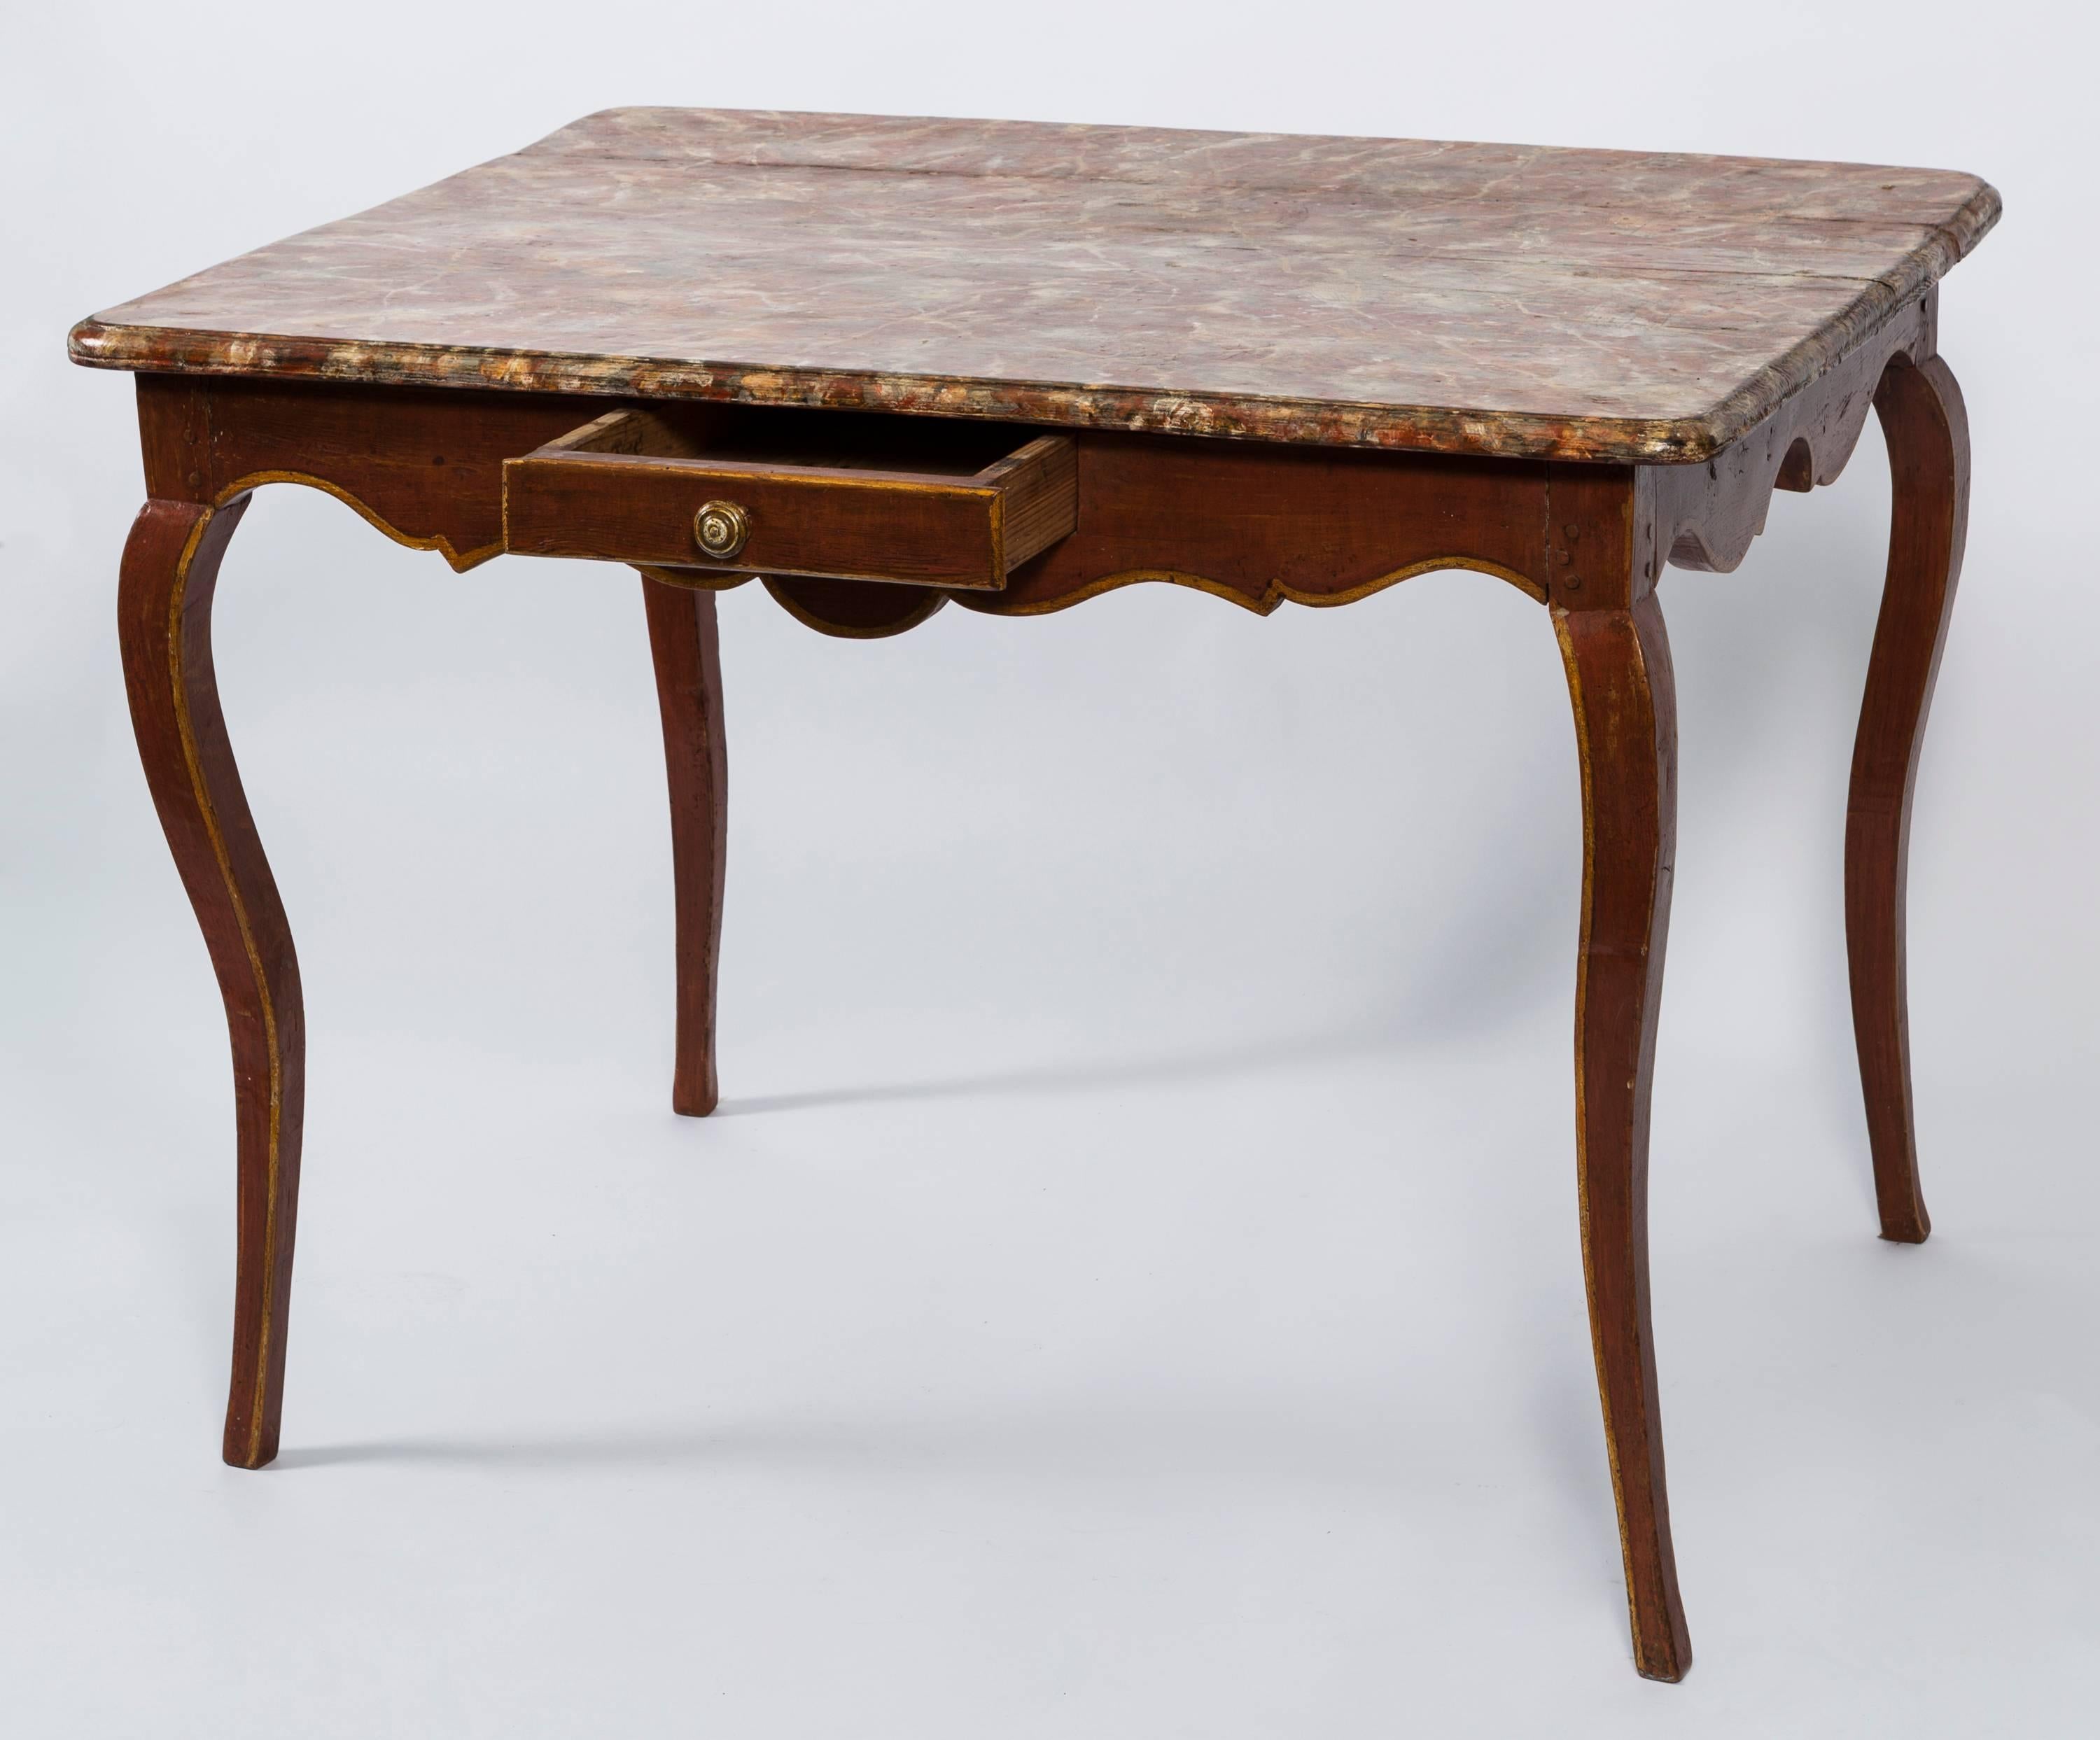 19th Century French Painted Wood Table with Faux Marble Top In Good Condition For Sale In Nashville, TN